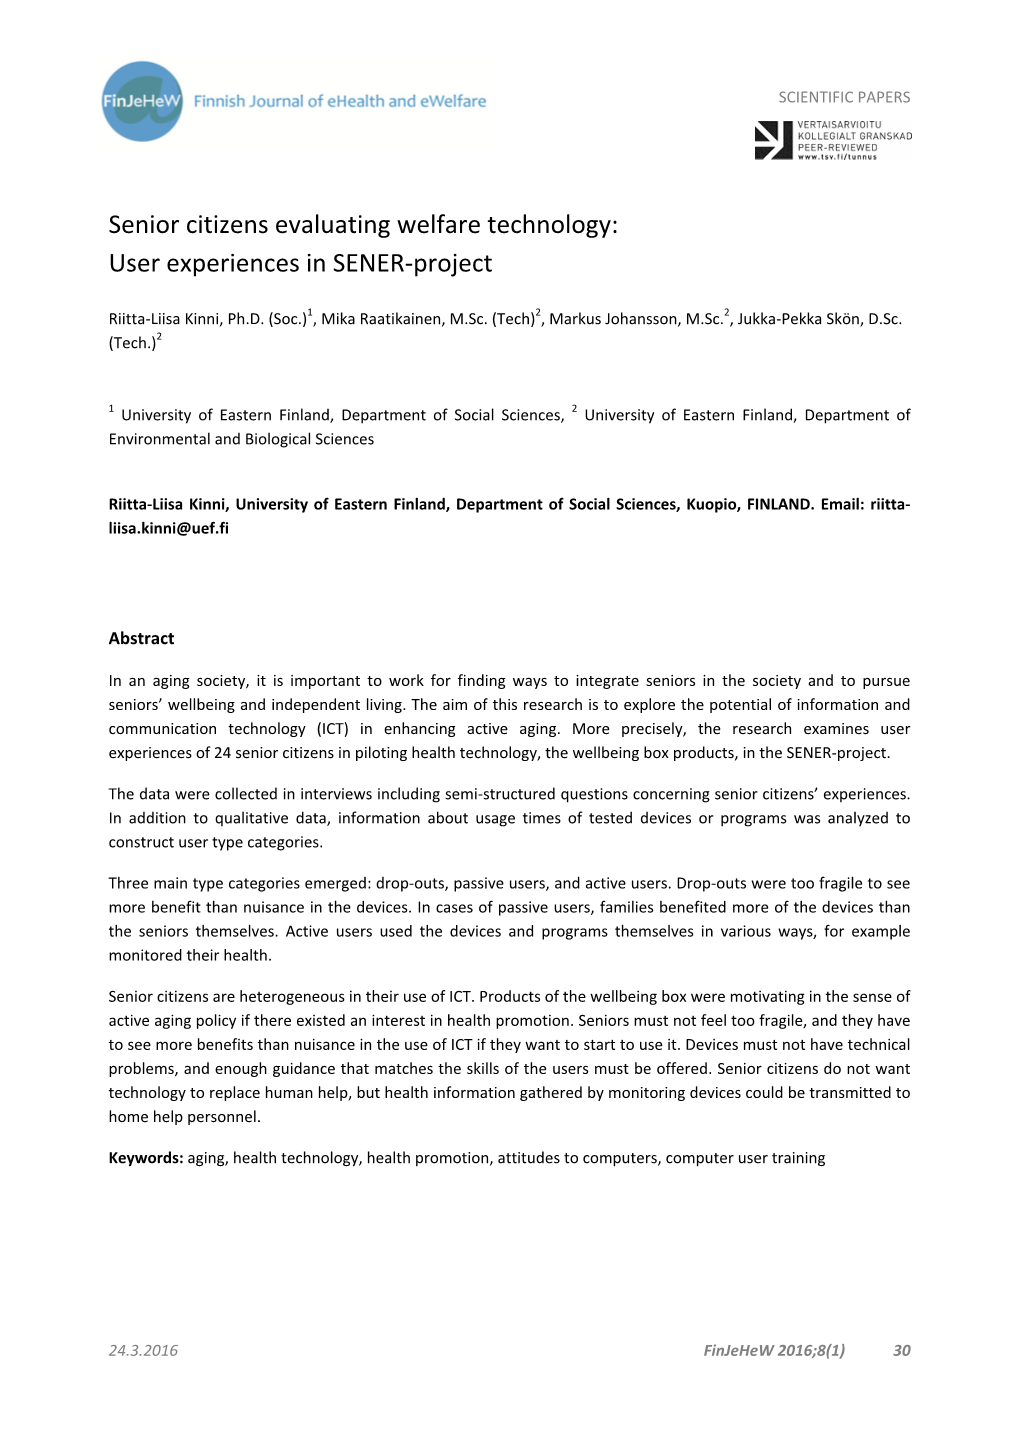 Senior Citizens Evaluating Welfare Technology: User Experiences in SENER‐Project